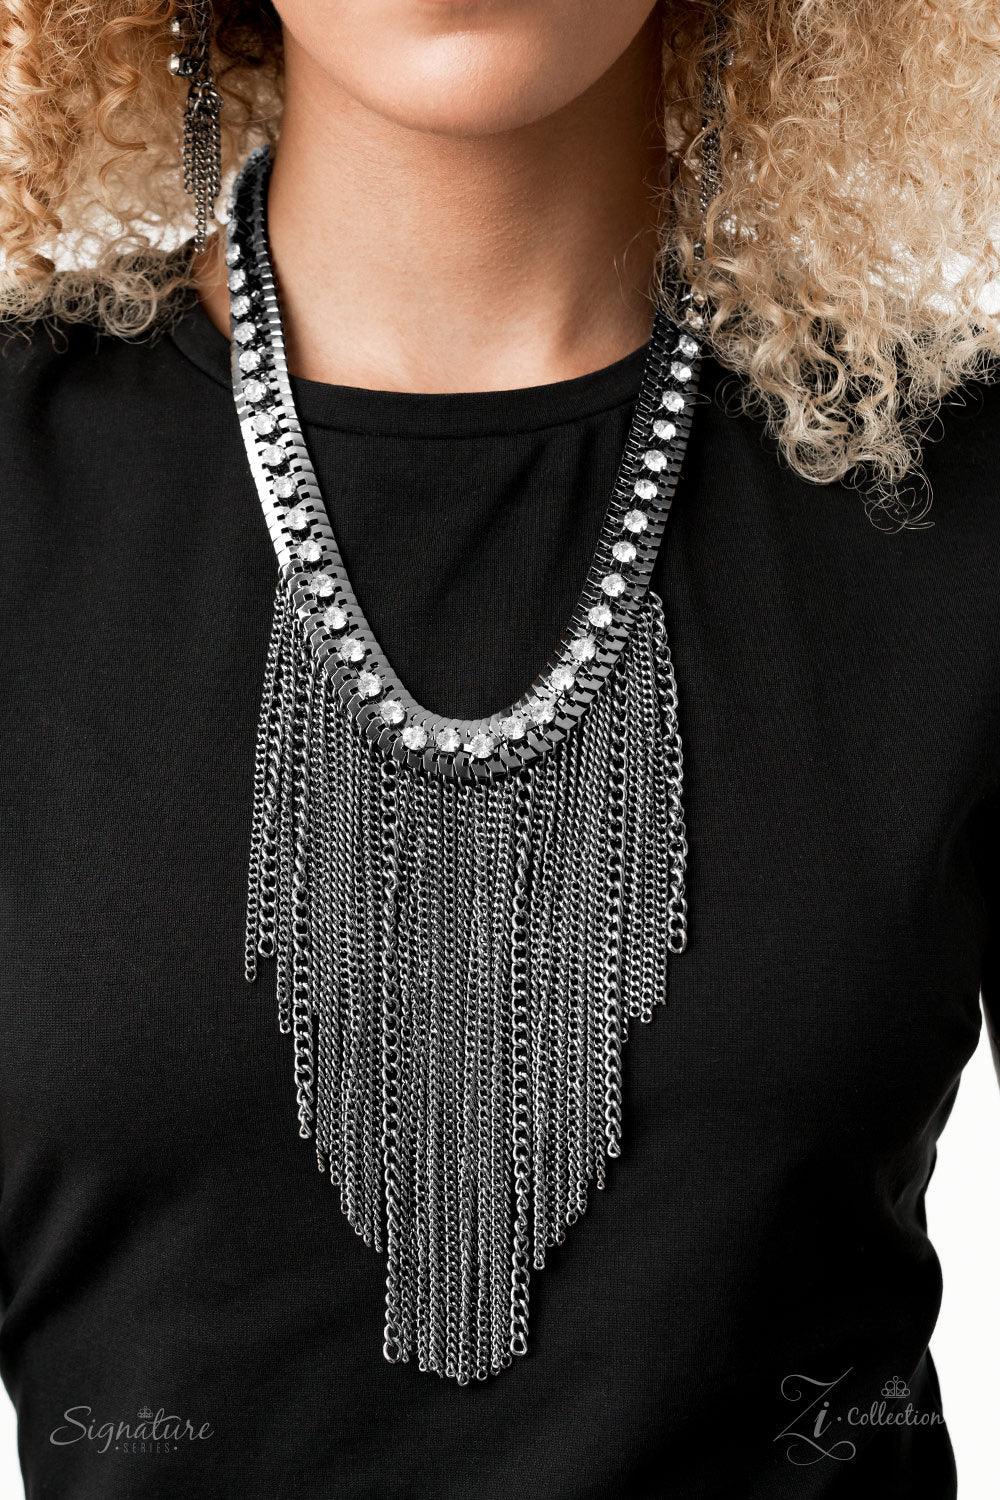 Paparazzi Accessories The Alex 💗💗ZiCollection $25💗💗 A sassy curtain of mismatched gunmetal chains tapers from the bottom of a dramatic row of glassy white rhinestones that have been delicately fastened to an edgy row of flattened gunmetal chain. The e